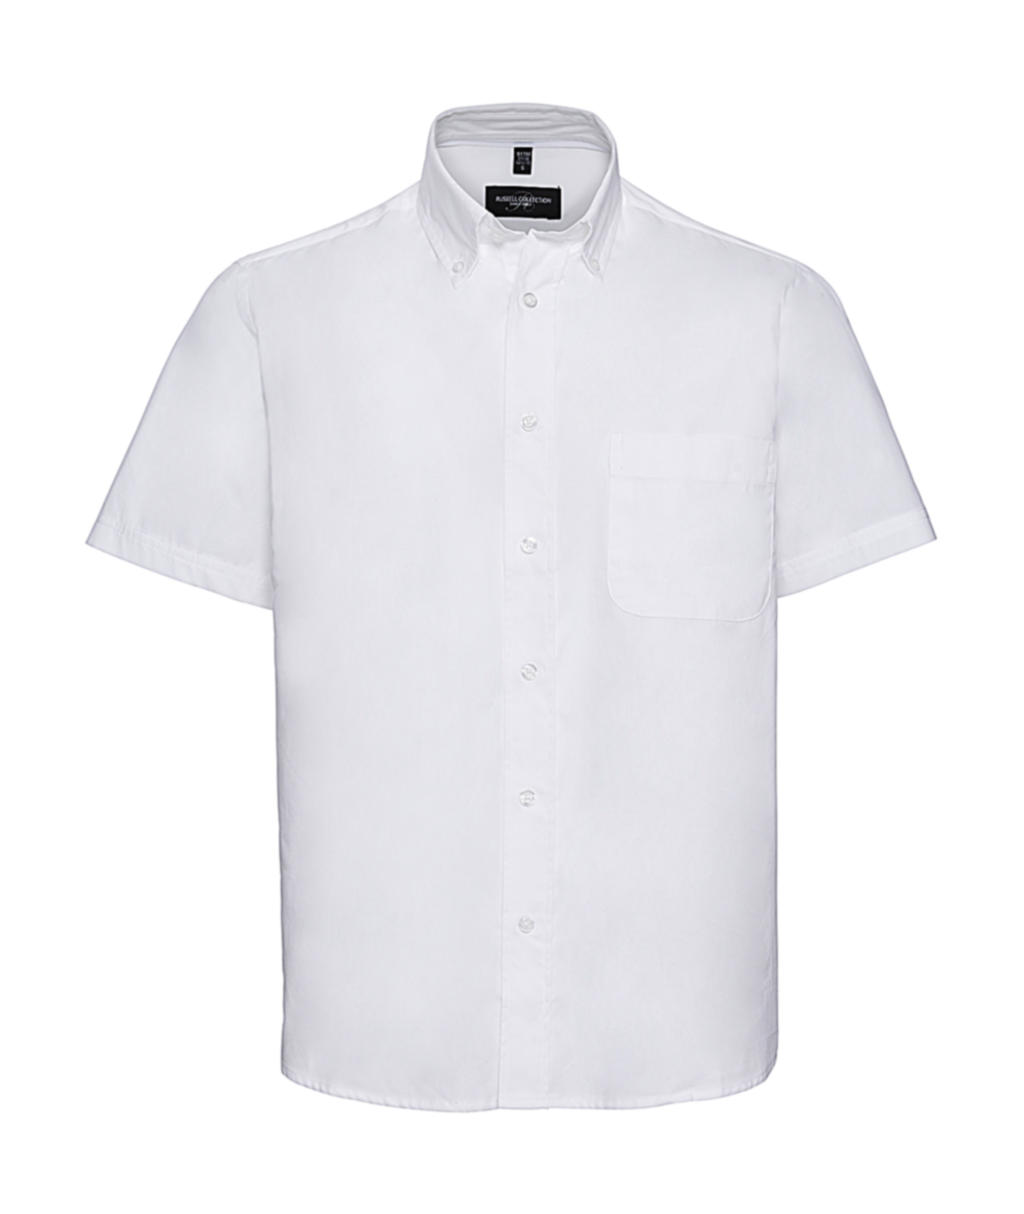  Short Sleeve Classic Twill Shirt in Farbe White